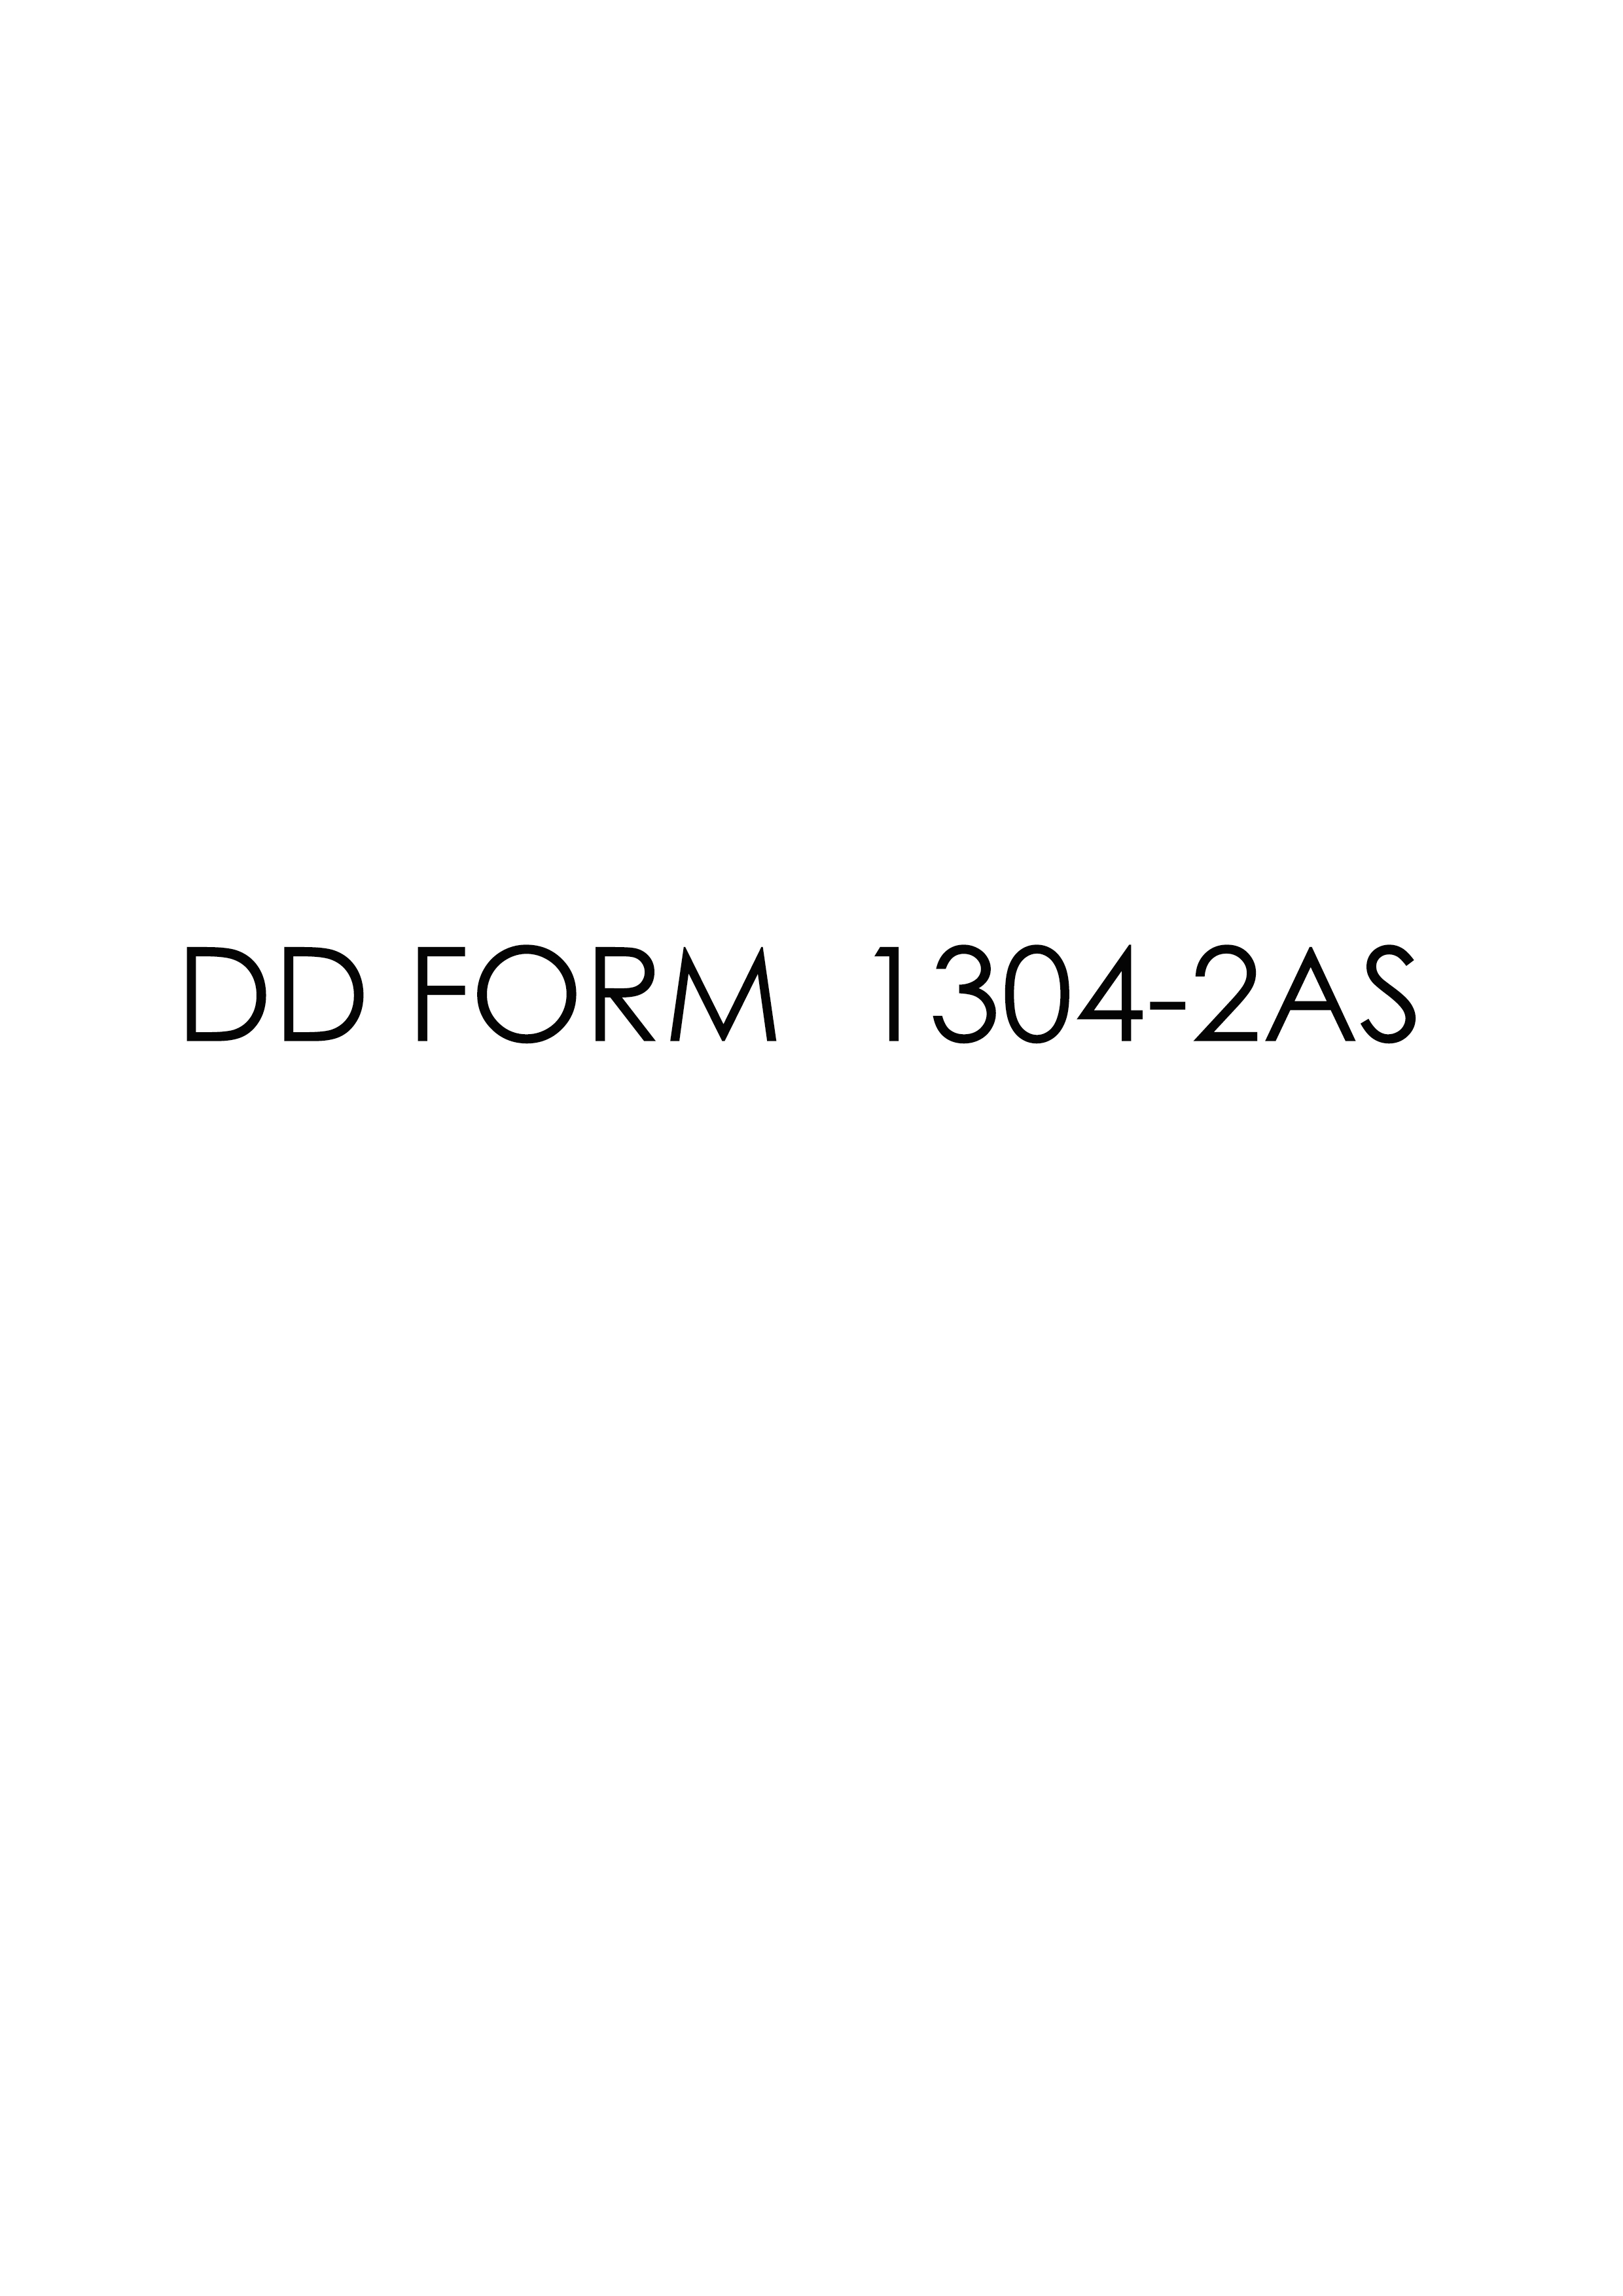 Download dd 1304-2AS Form